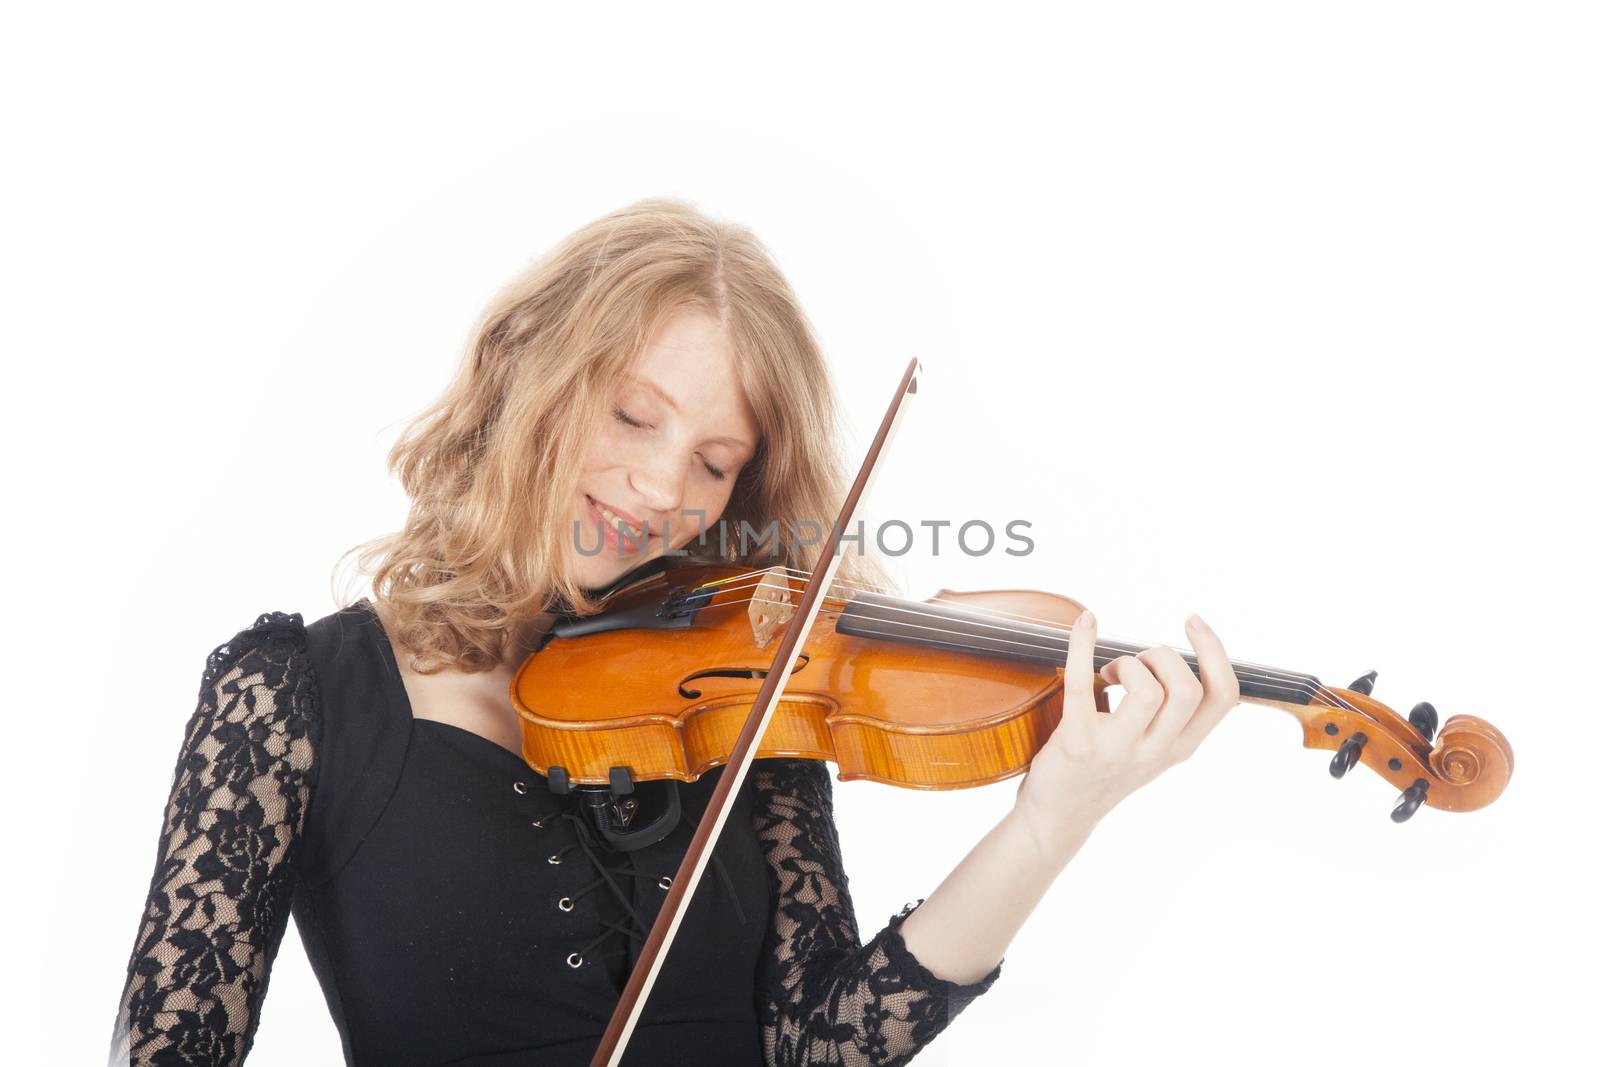 young woman in black dress playing violin against white background